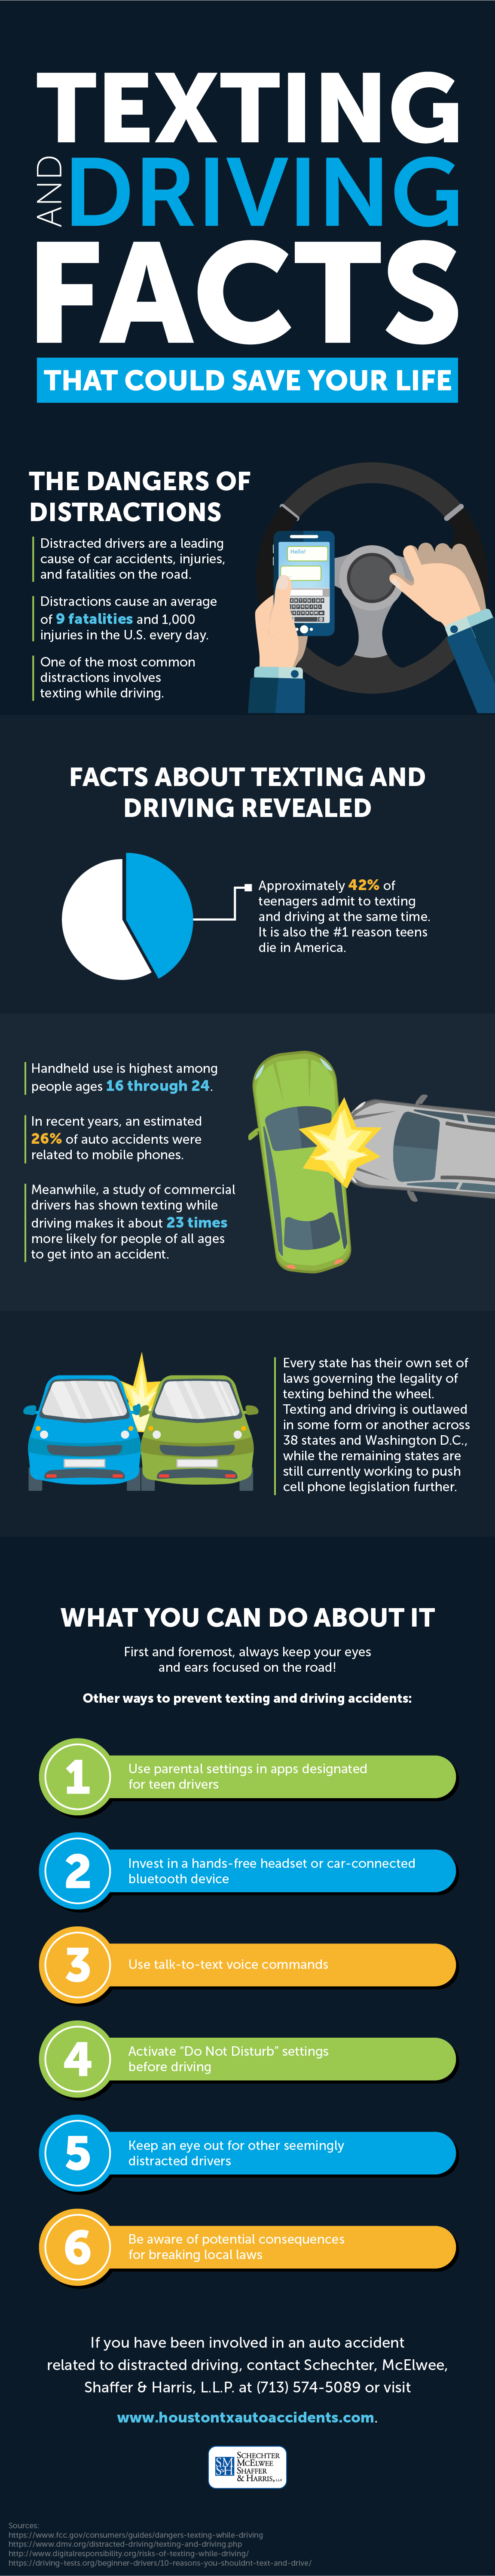 Texting and Driving Facts Infographic